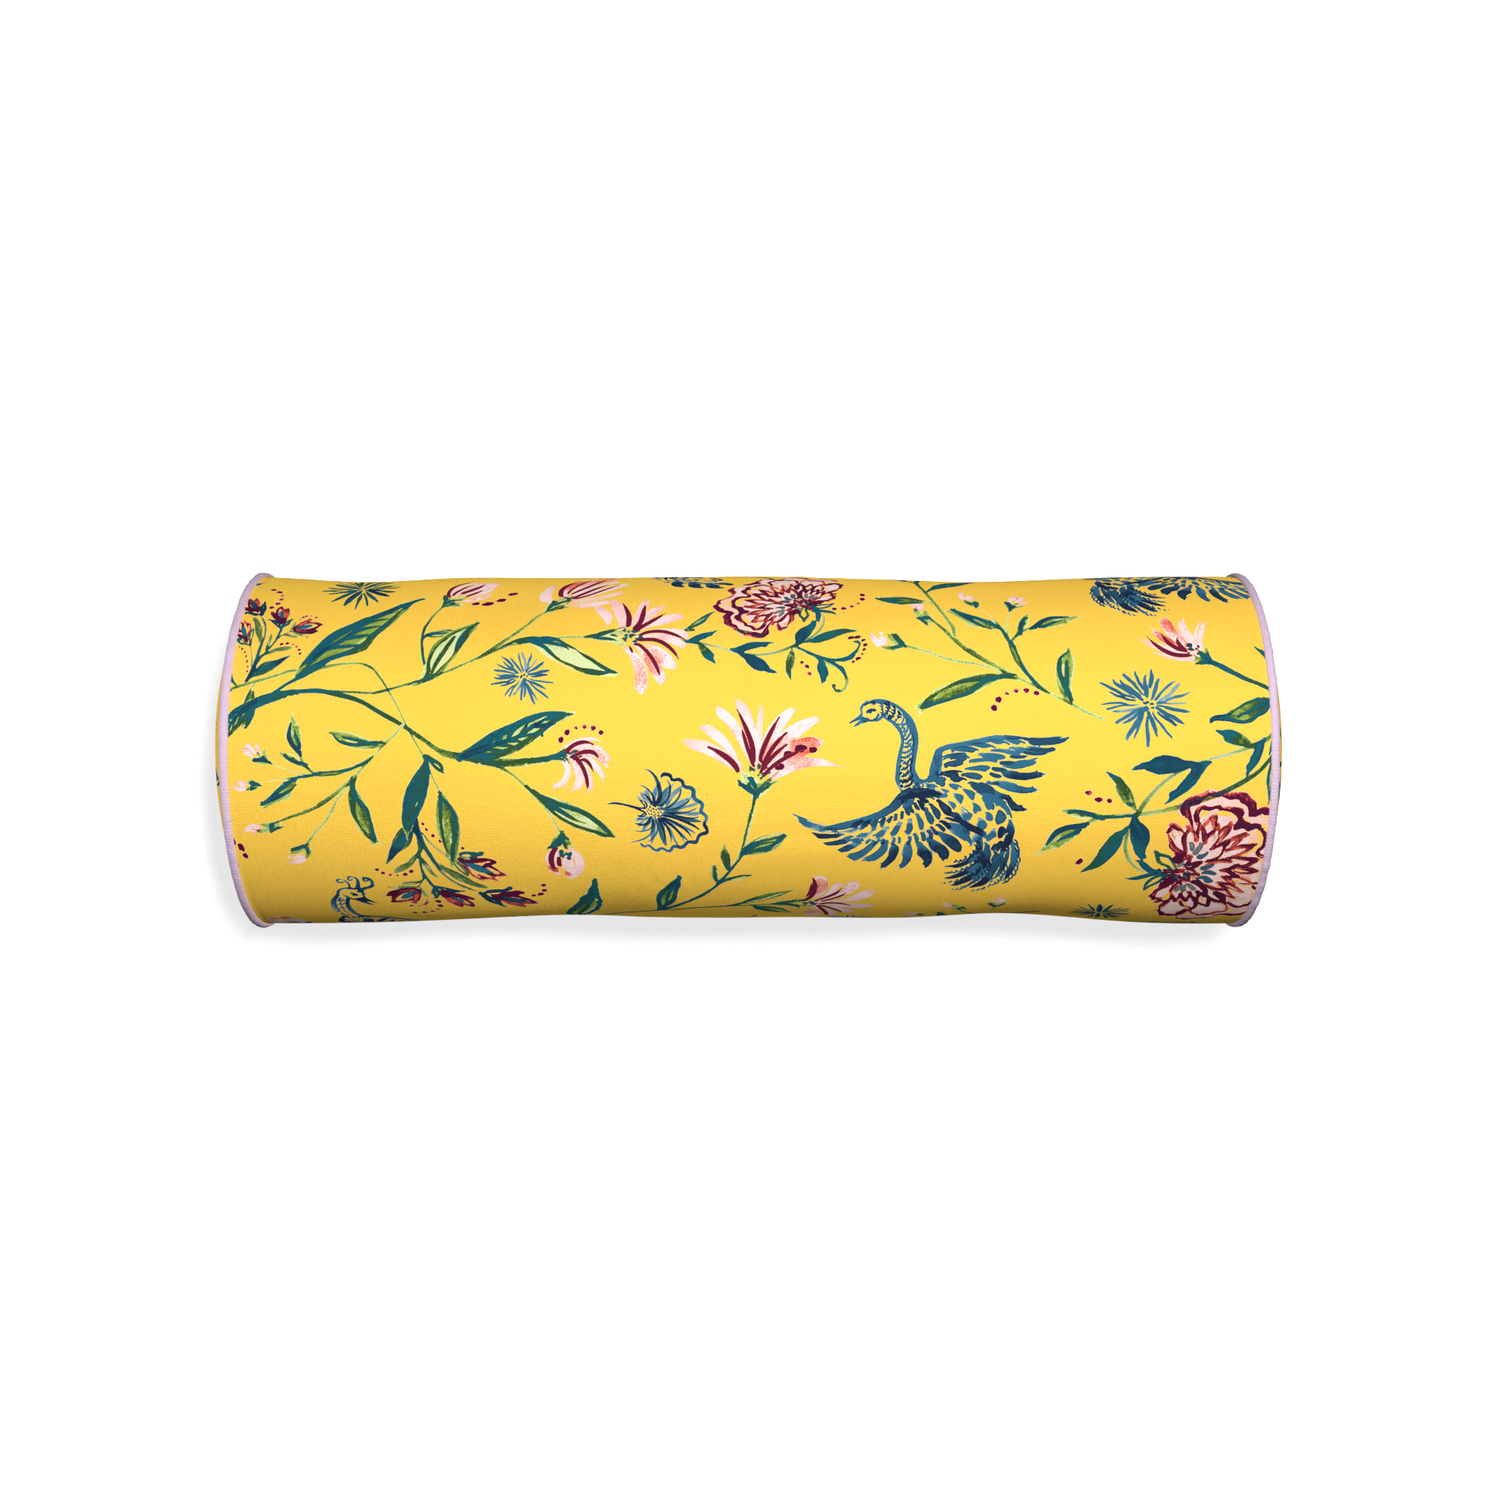 Bolster daphne canary custom yellow chinoiseriepillow with l piping on white background